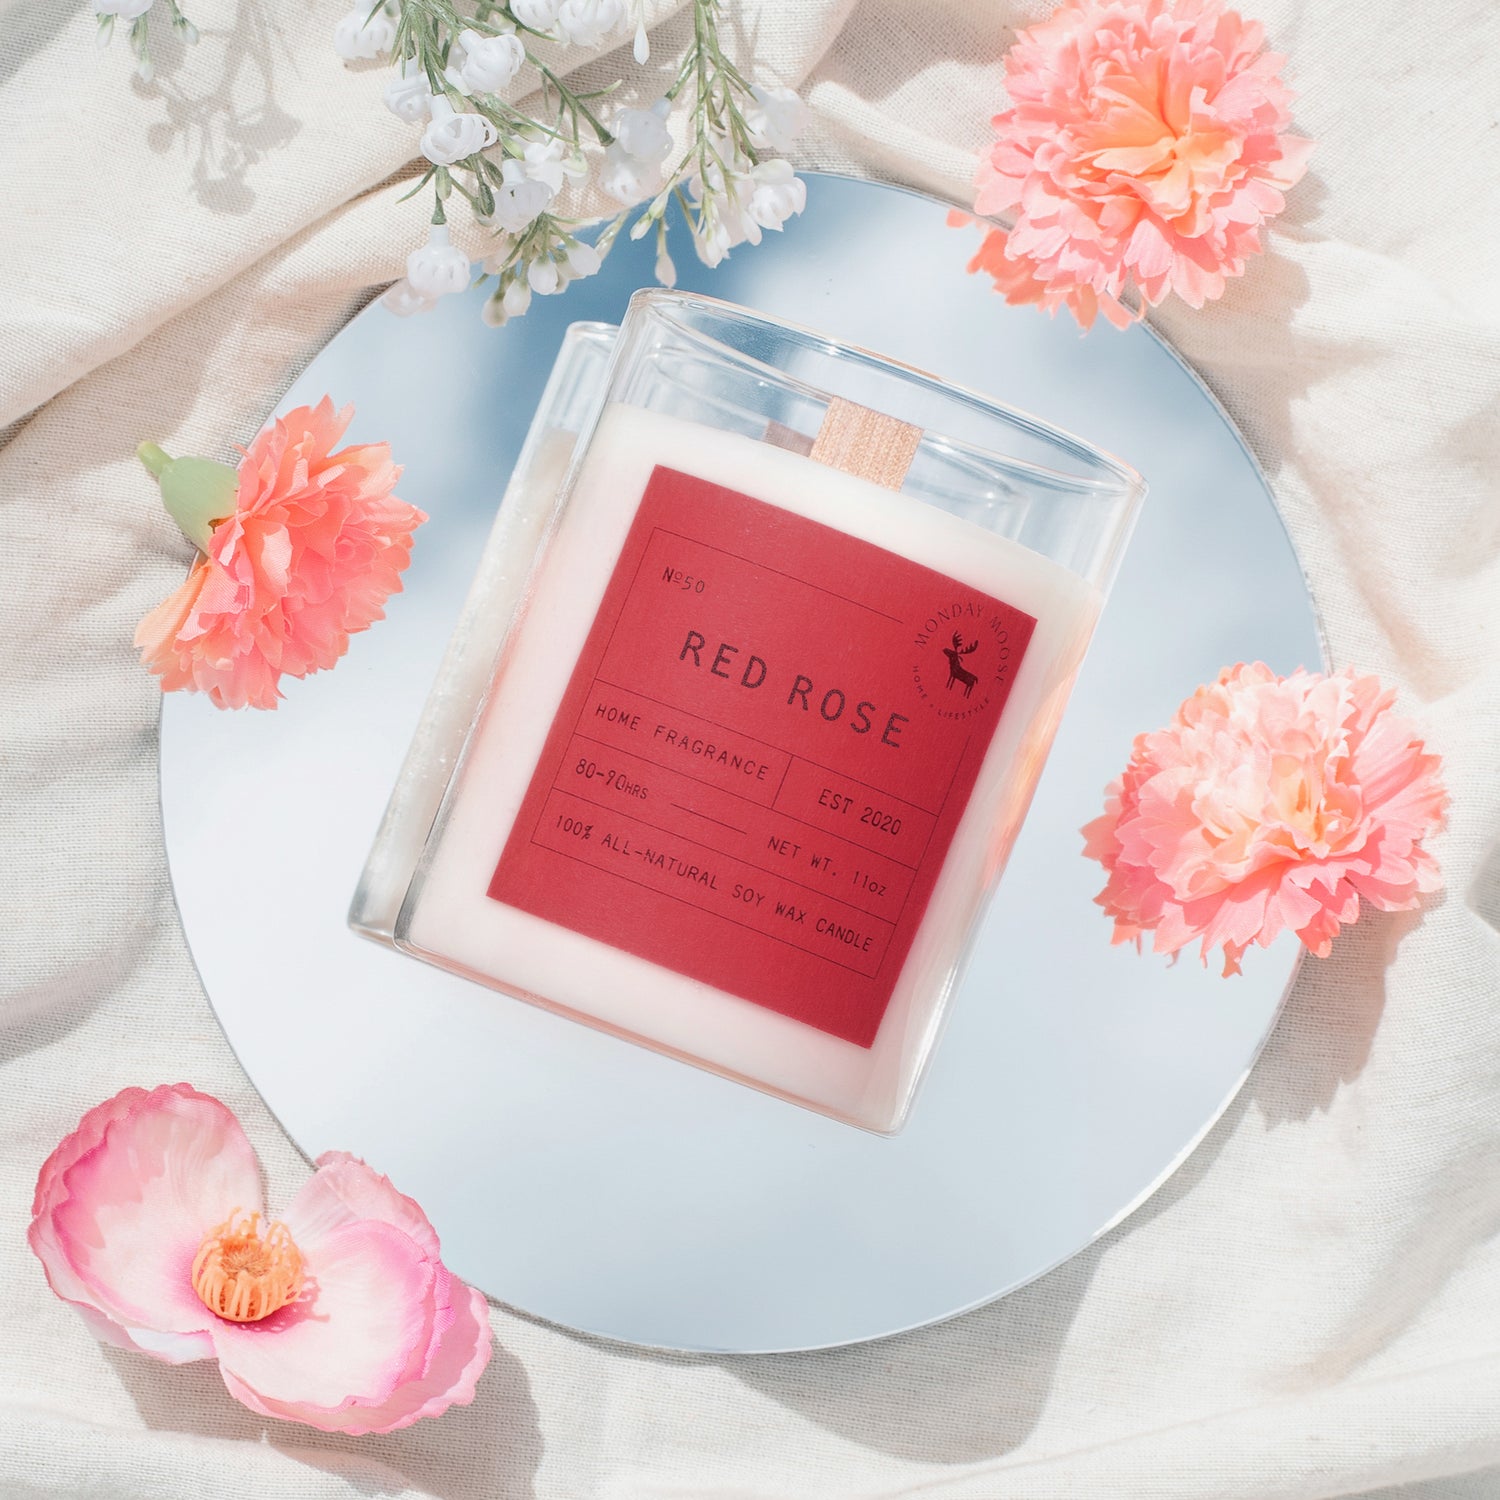 soy wax scented candle home fragrance red rose